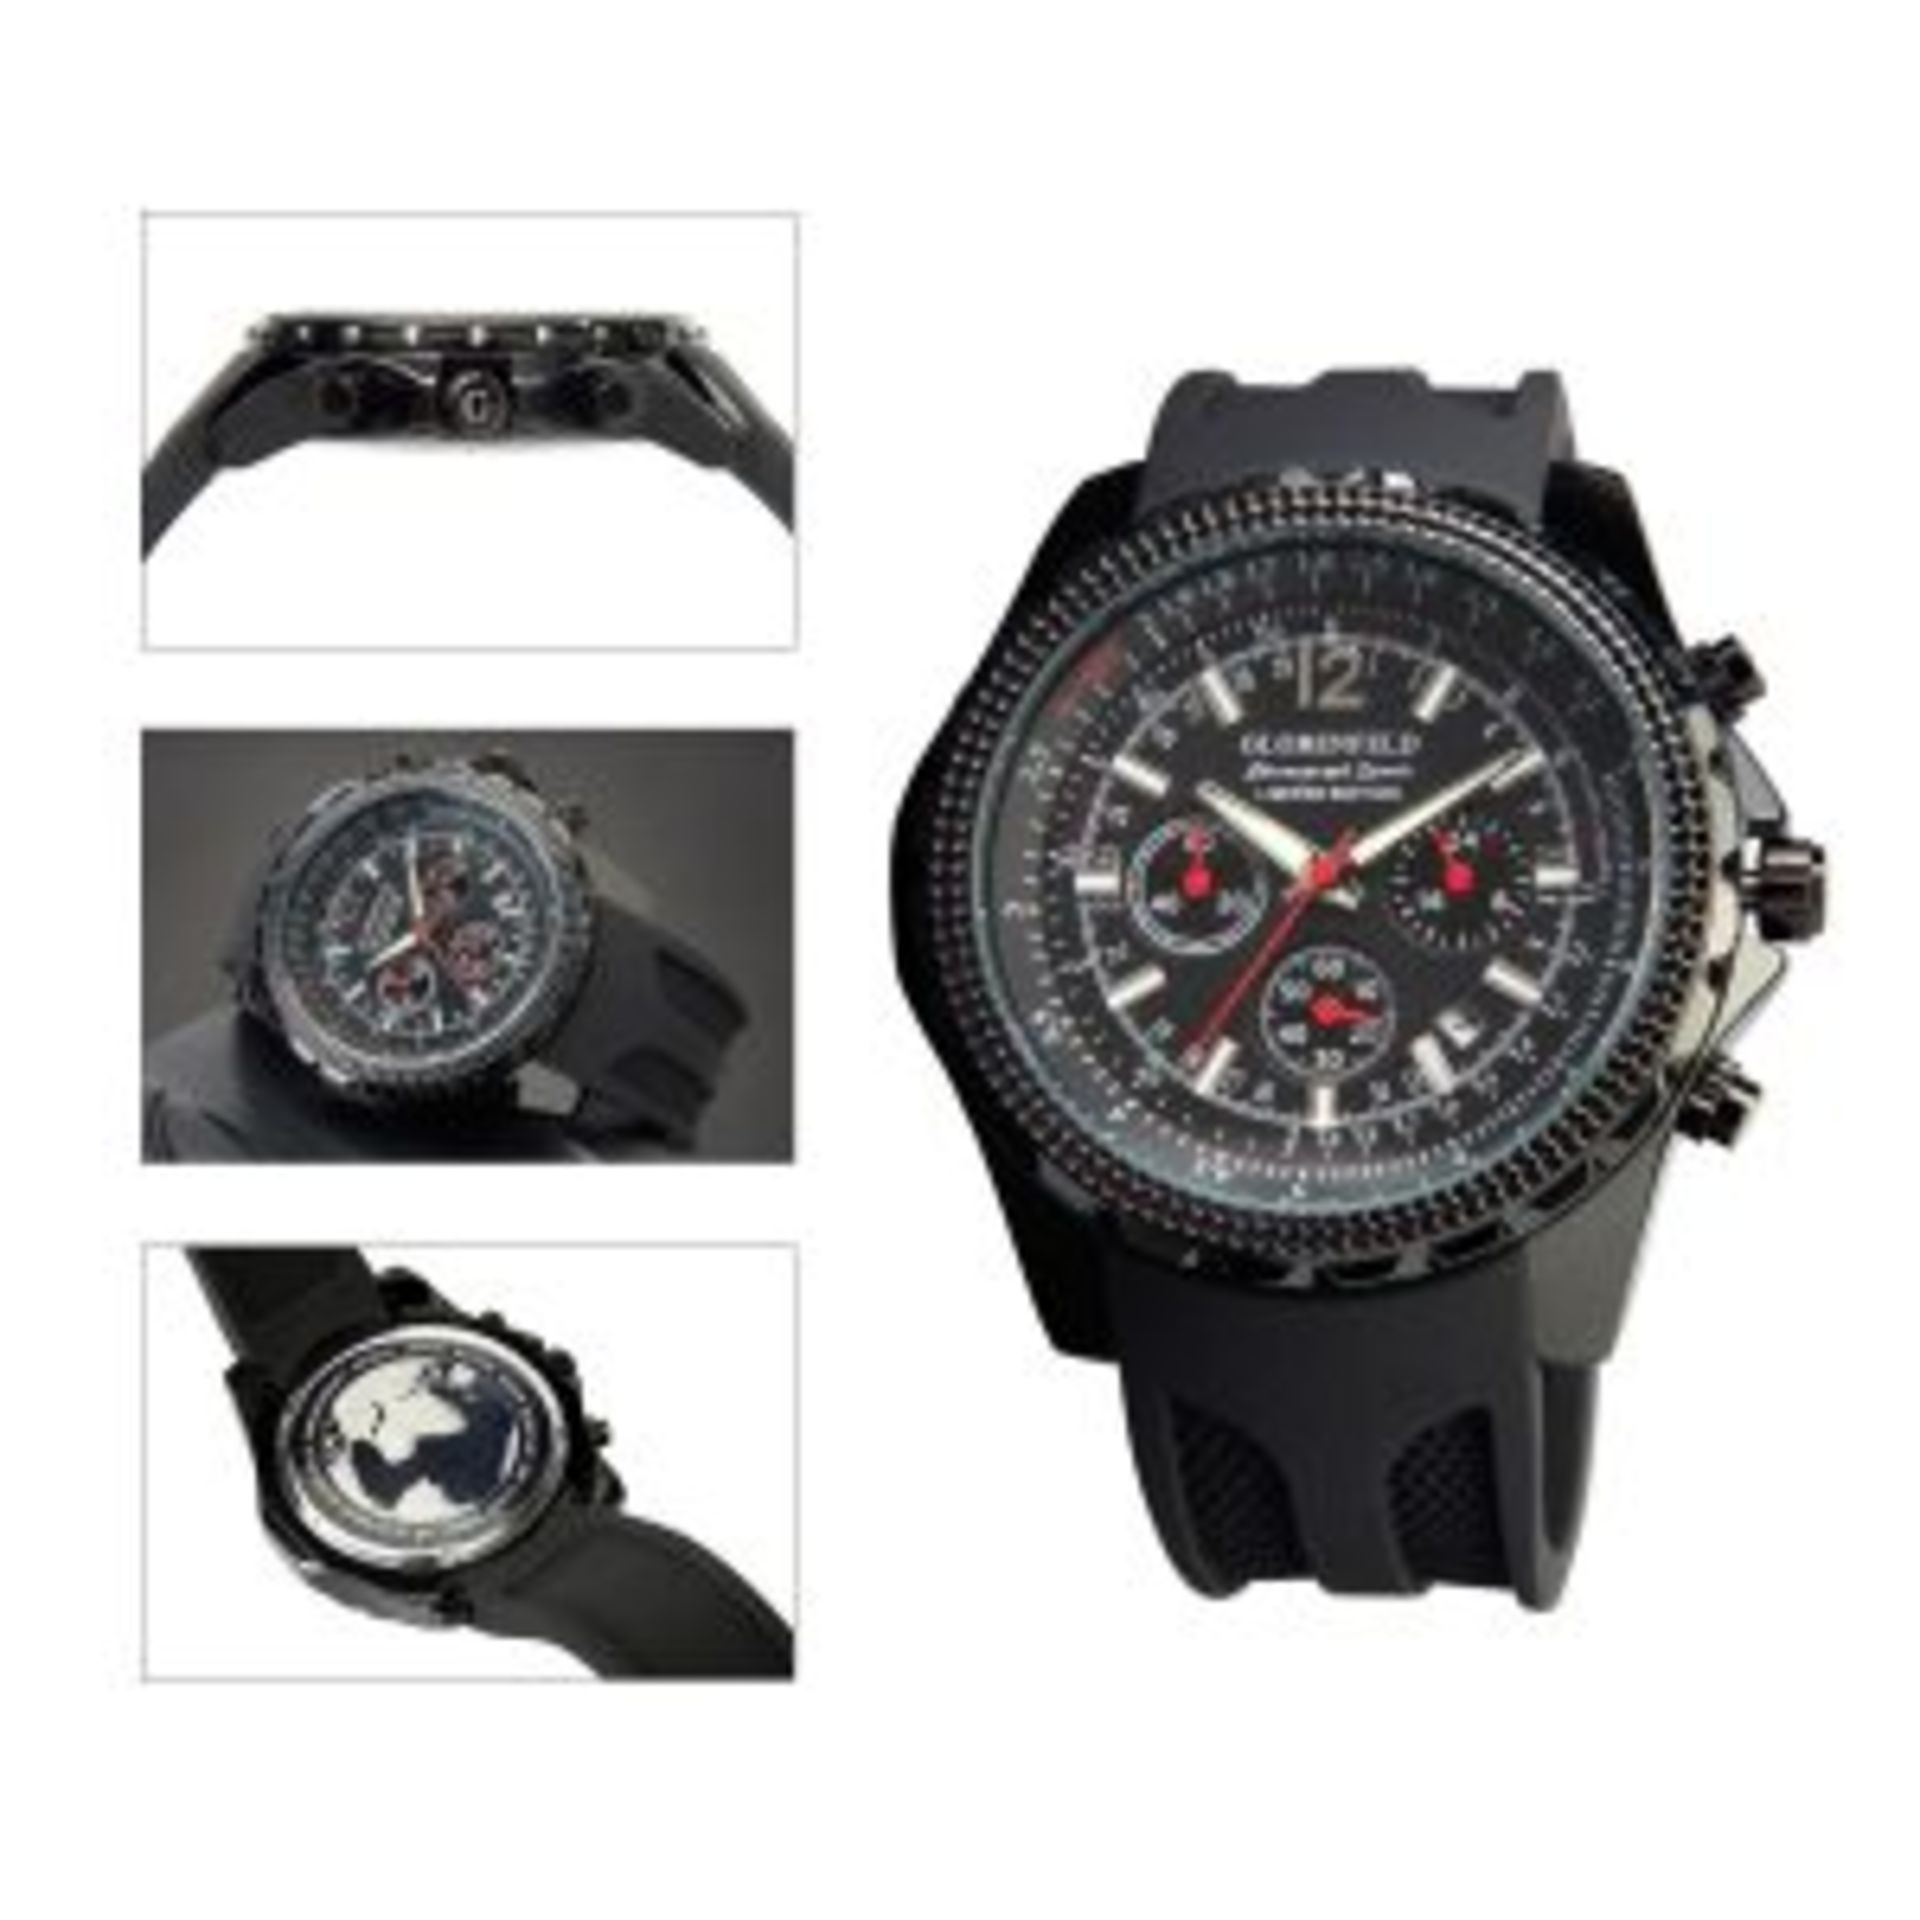 + VAT Brand New Gents Globenfeld Limited Edition Chronograph Sports Watch with Full Chronograph - Image 2 of 2